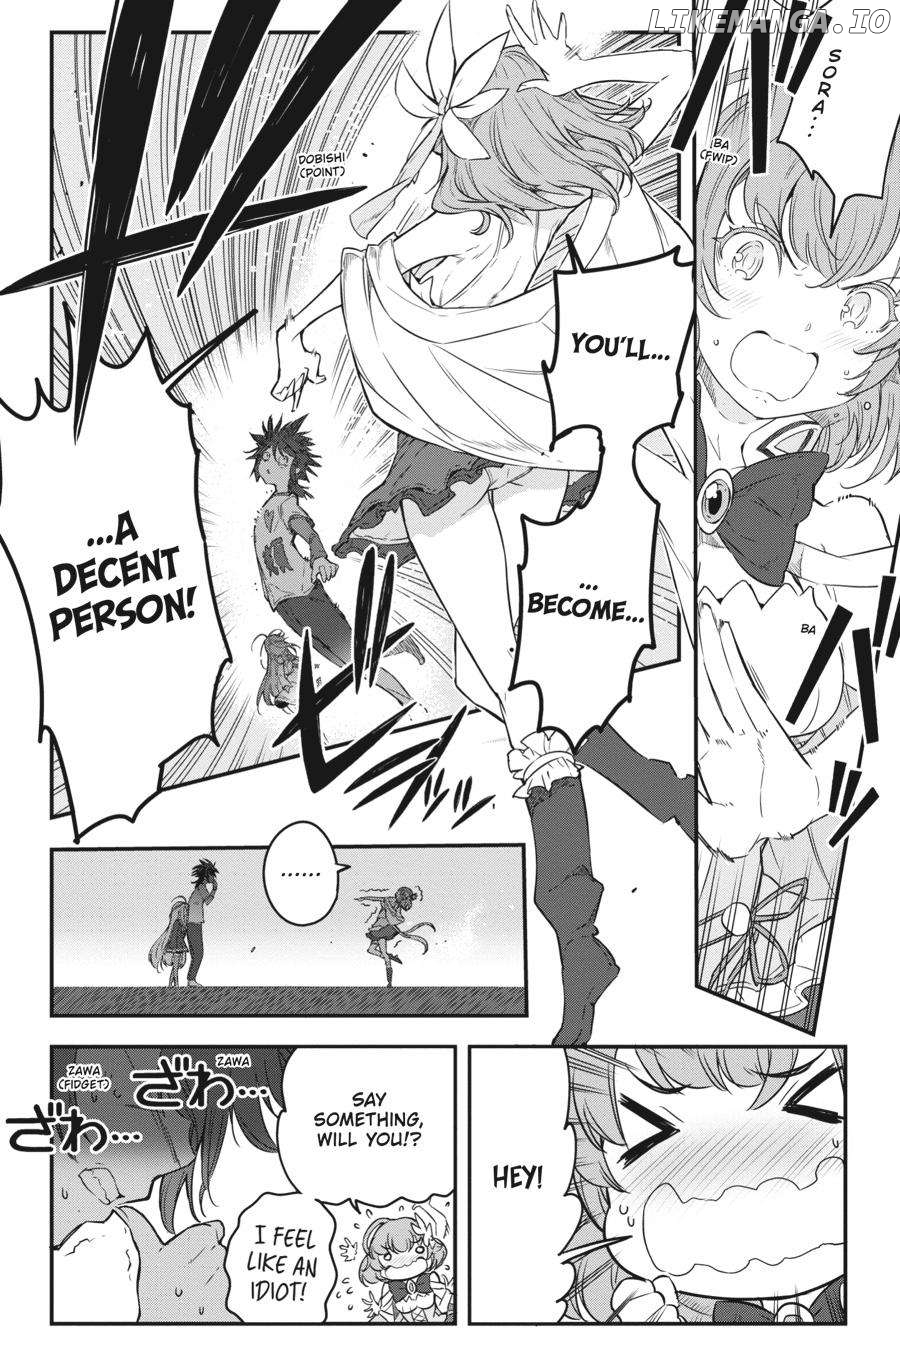 No Game No Life Chapter 2 - Eastern Union Arc Chapter 1 - page 22